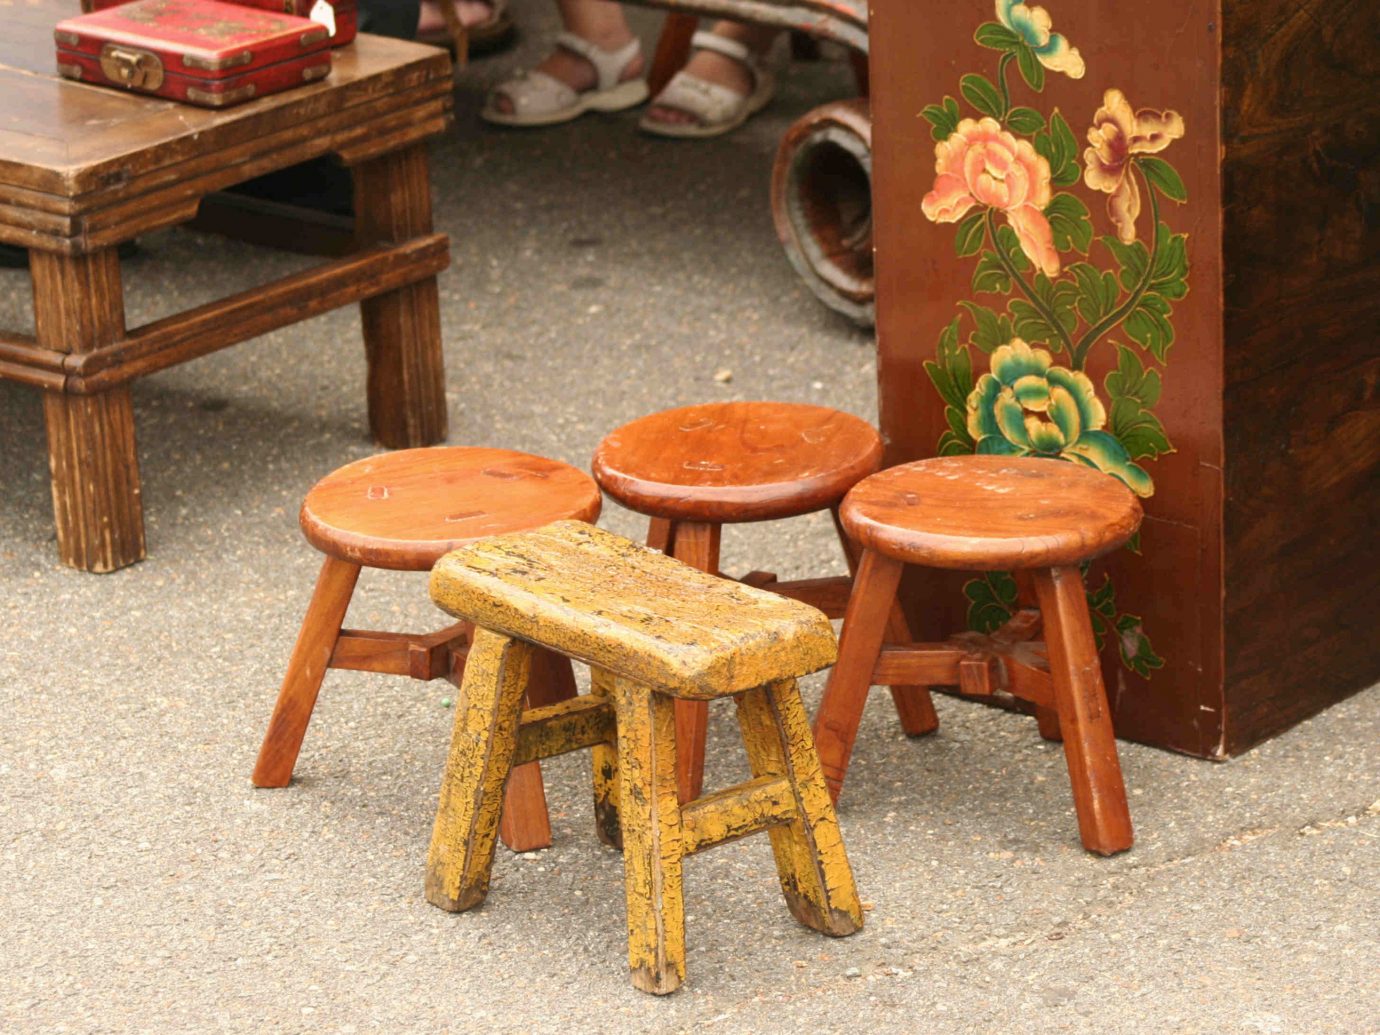 Trip Ideas floor furniture man made object chair table room seat wooden wood stool antique dining table